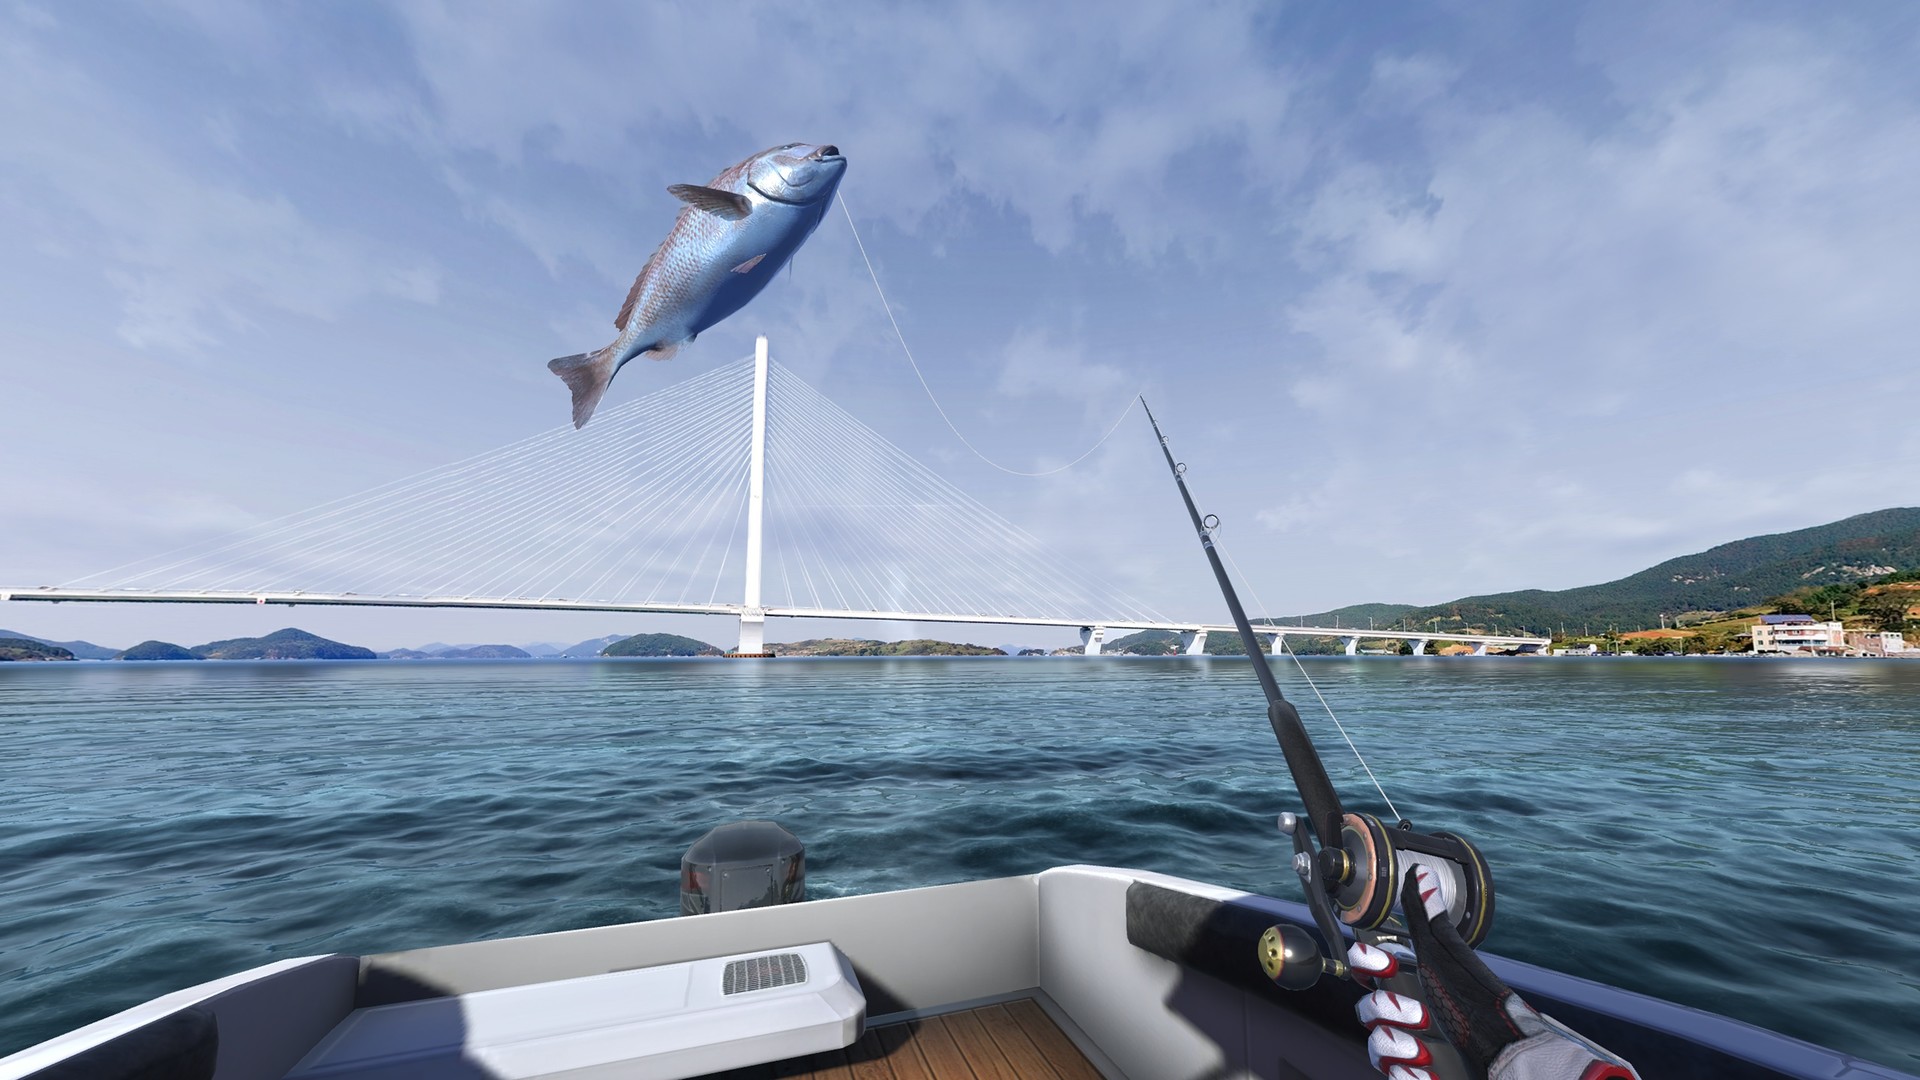 real vr fishing review